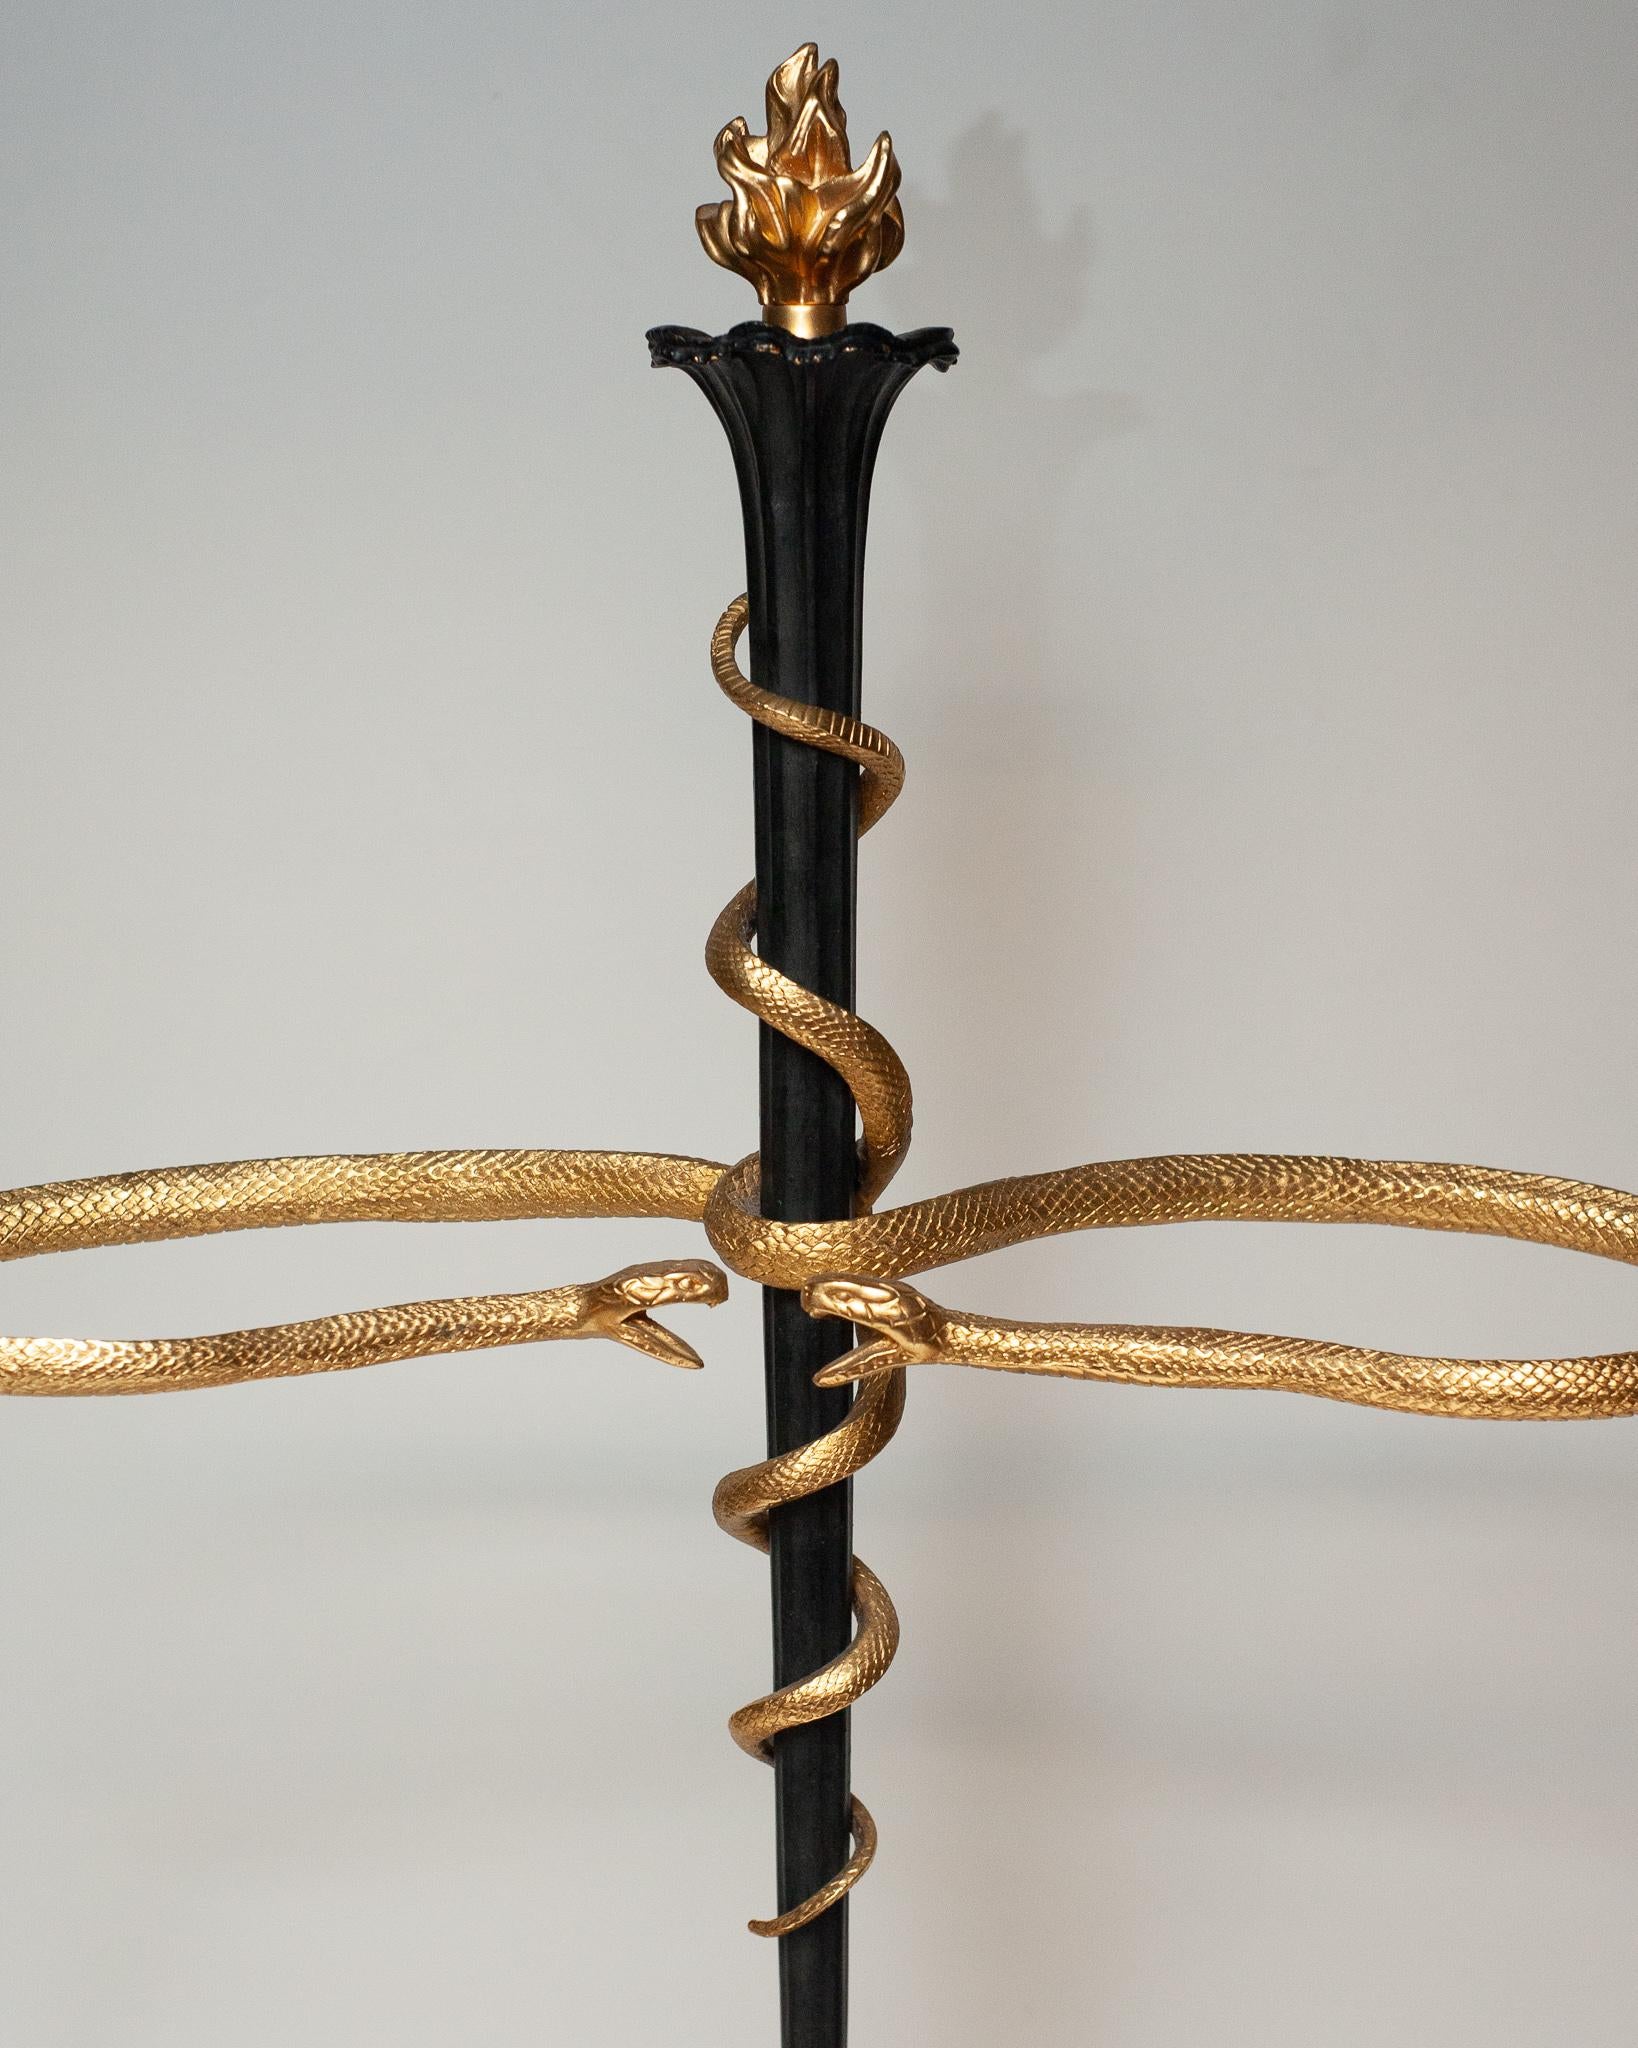 A stunning and unusual French antique umbrella stand in metal with ormolu details, featuring two snakes wrapped around the centre column and flame finial. Beautifully made and in good condition for it’s age and use, this is the perfect accent piece